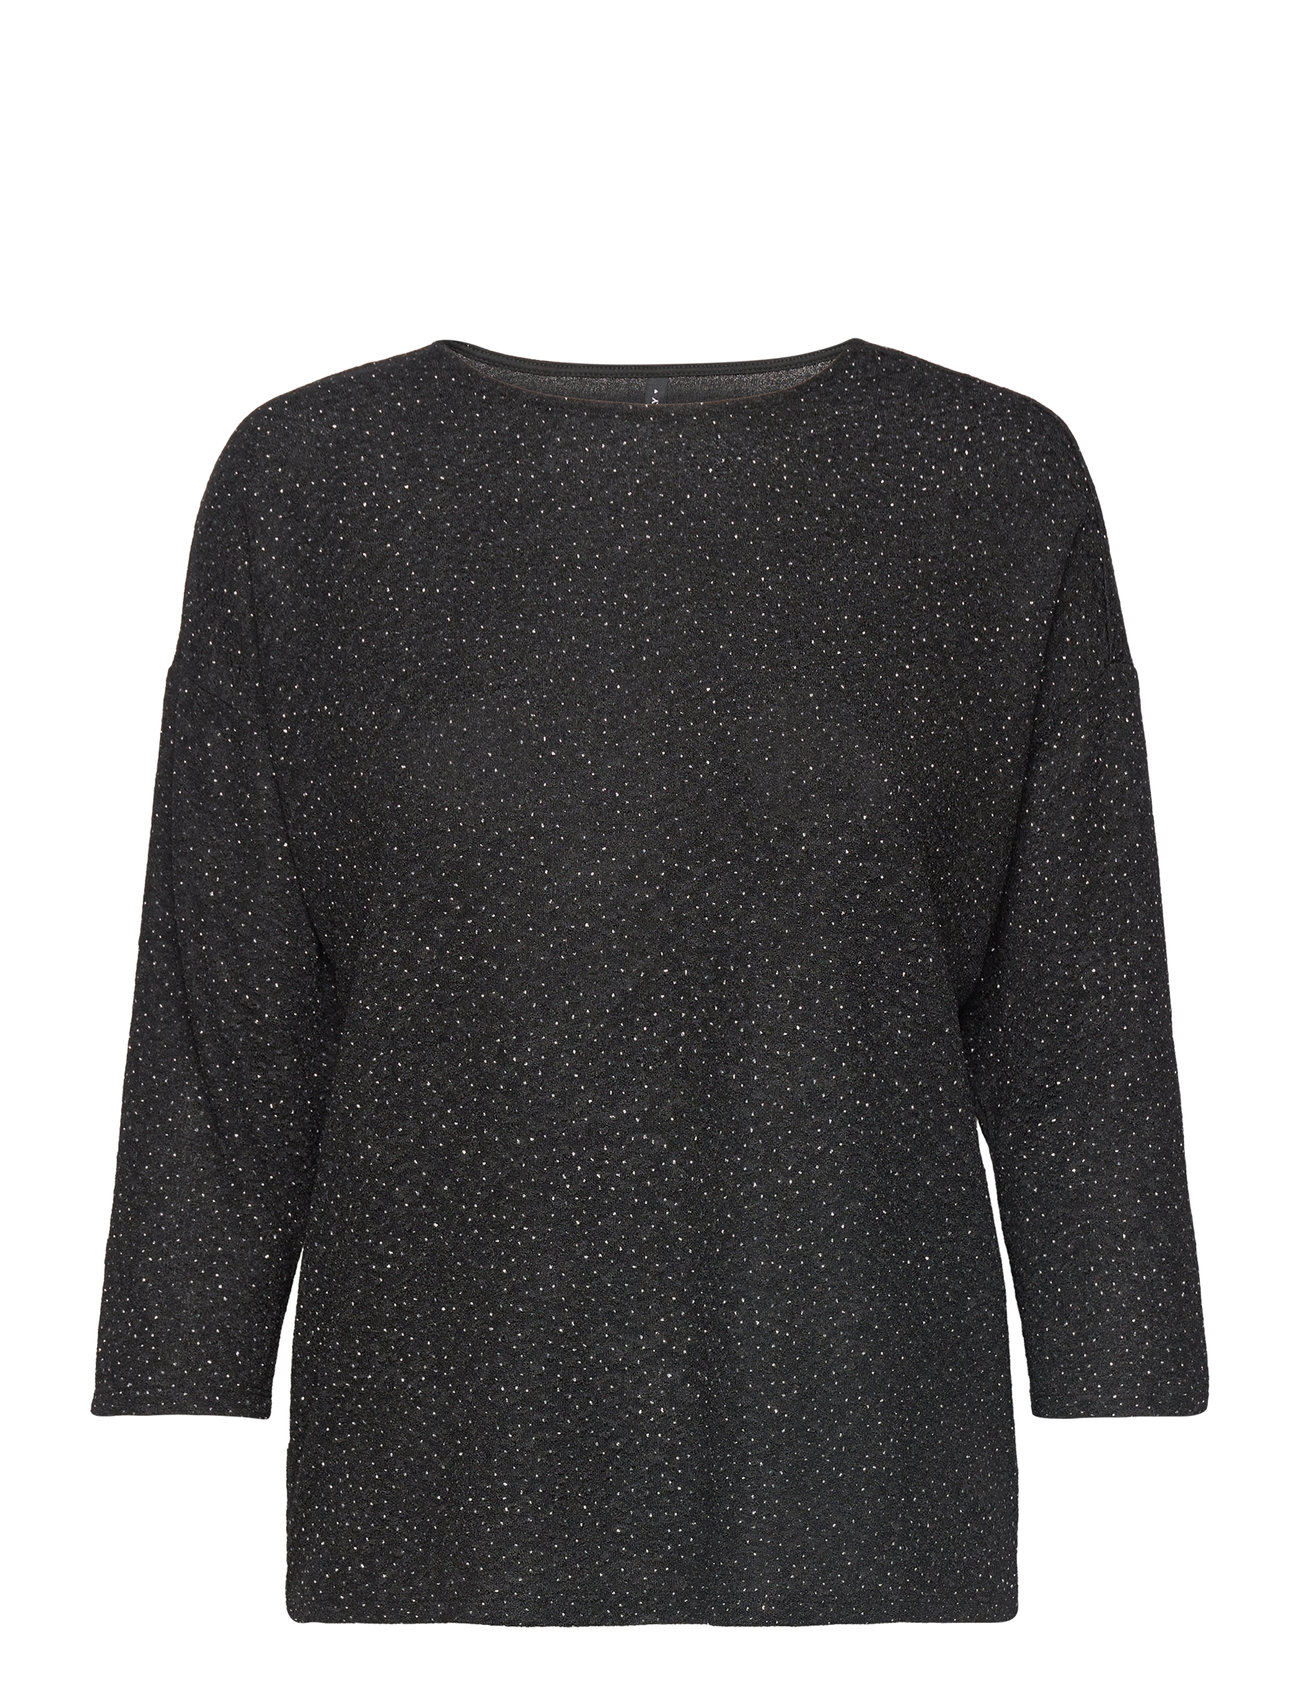 Onlqueen 3/4 Glitter Top Jrs Tops T-shirts & Tops Long-sleeved Black ONLY